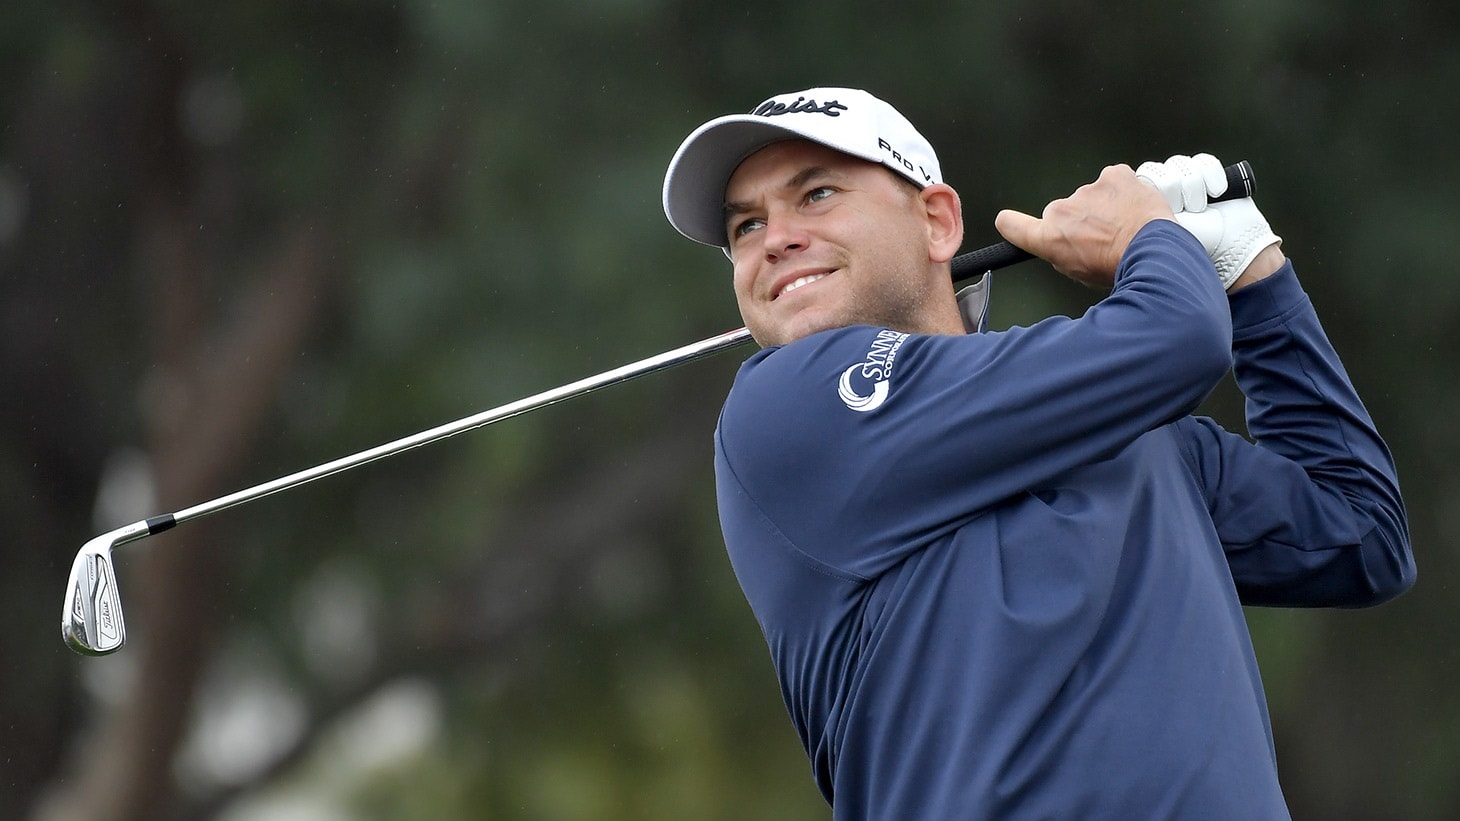 Bill Haas plays an approach shot with his Titleist AP2 iron during action at the 2019 AT&T Byron Nelson